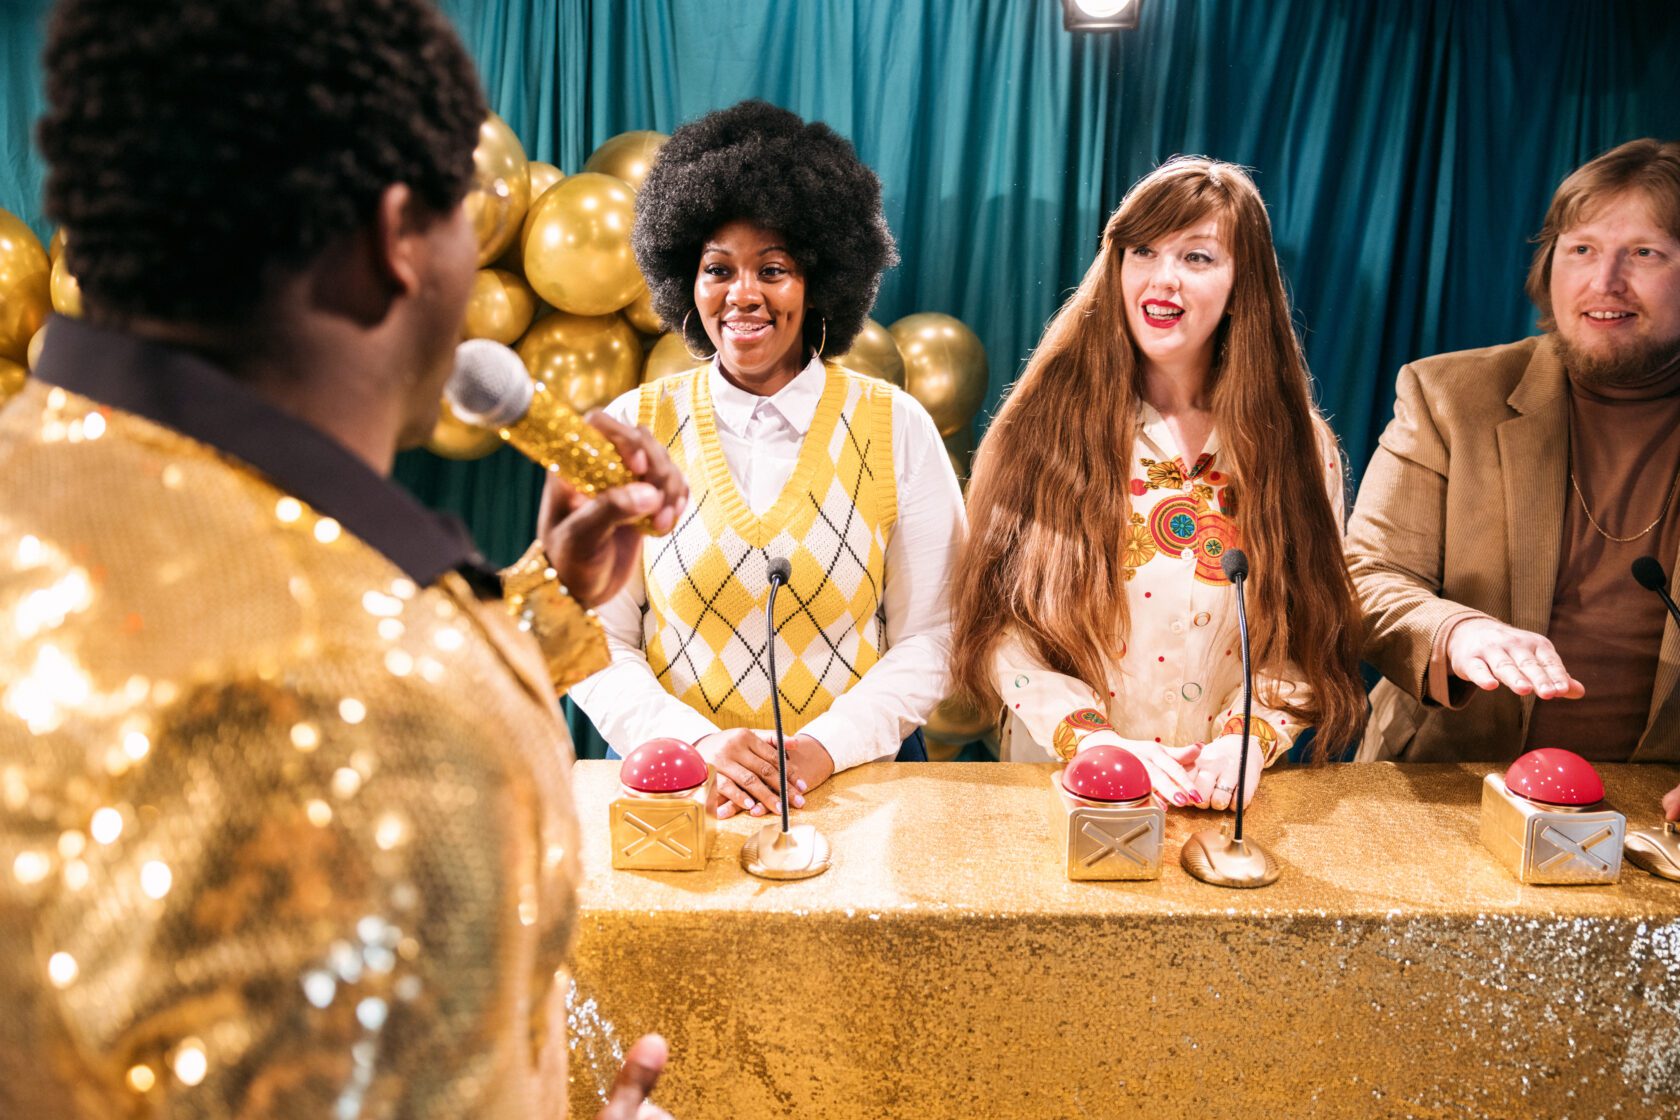 A fun depiction of a competitive TV game show, stylized in late 1970's or early 1980's fashion.  The host, an African American man in a stunning gold blazer, asks the contestants quiz trivia questions to see who will win the grand prize!  The participants hold their hands over their buzzers to signal they have the answer.